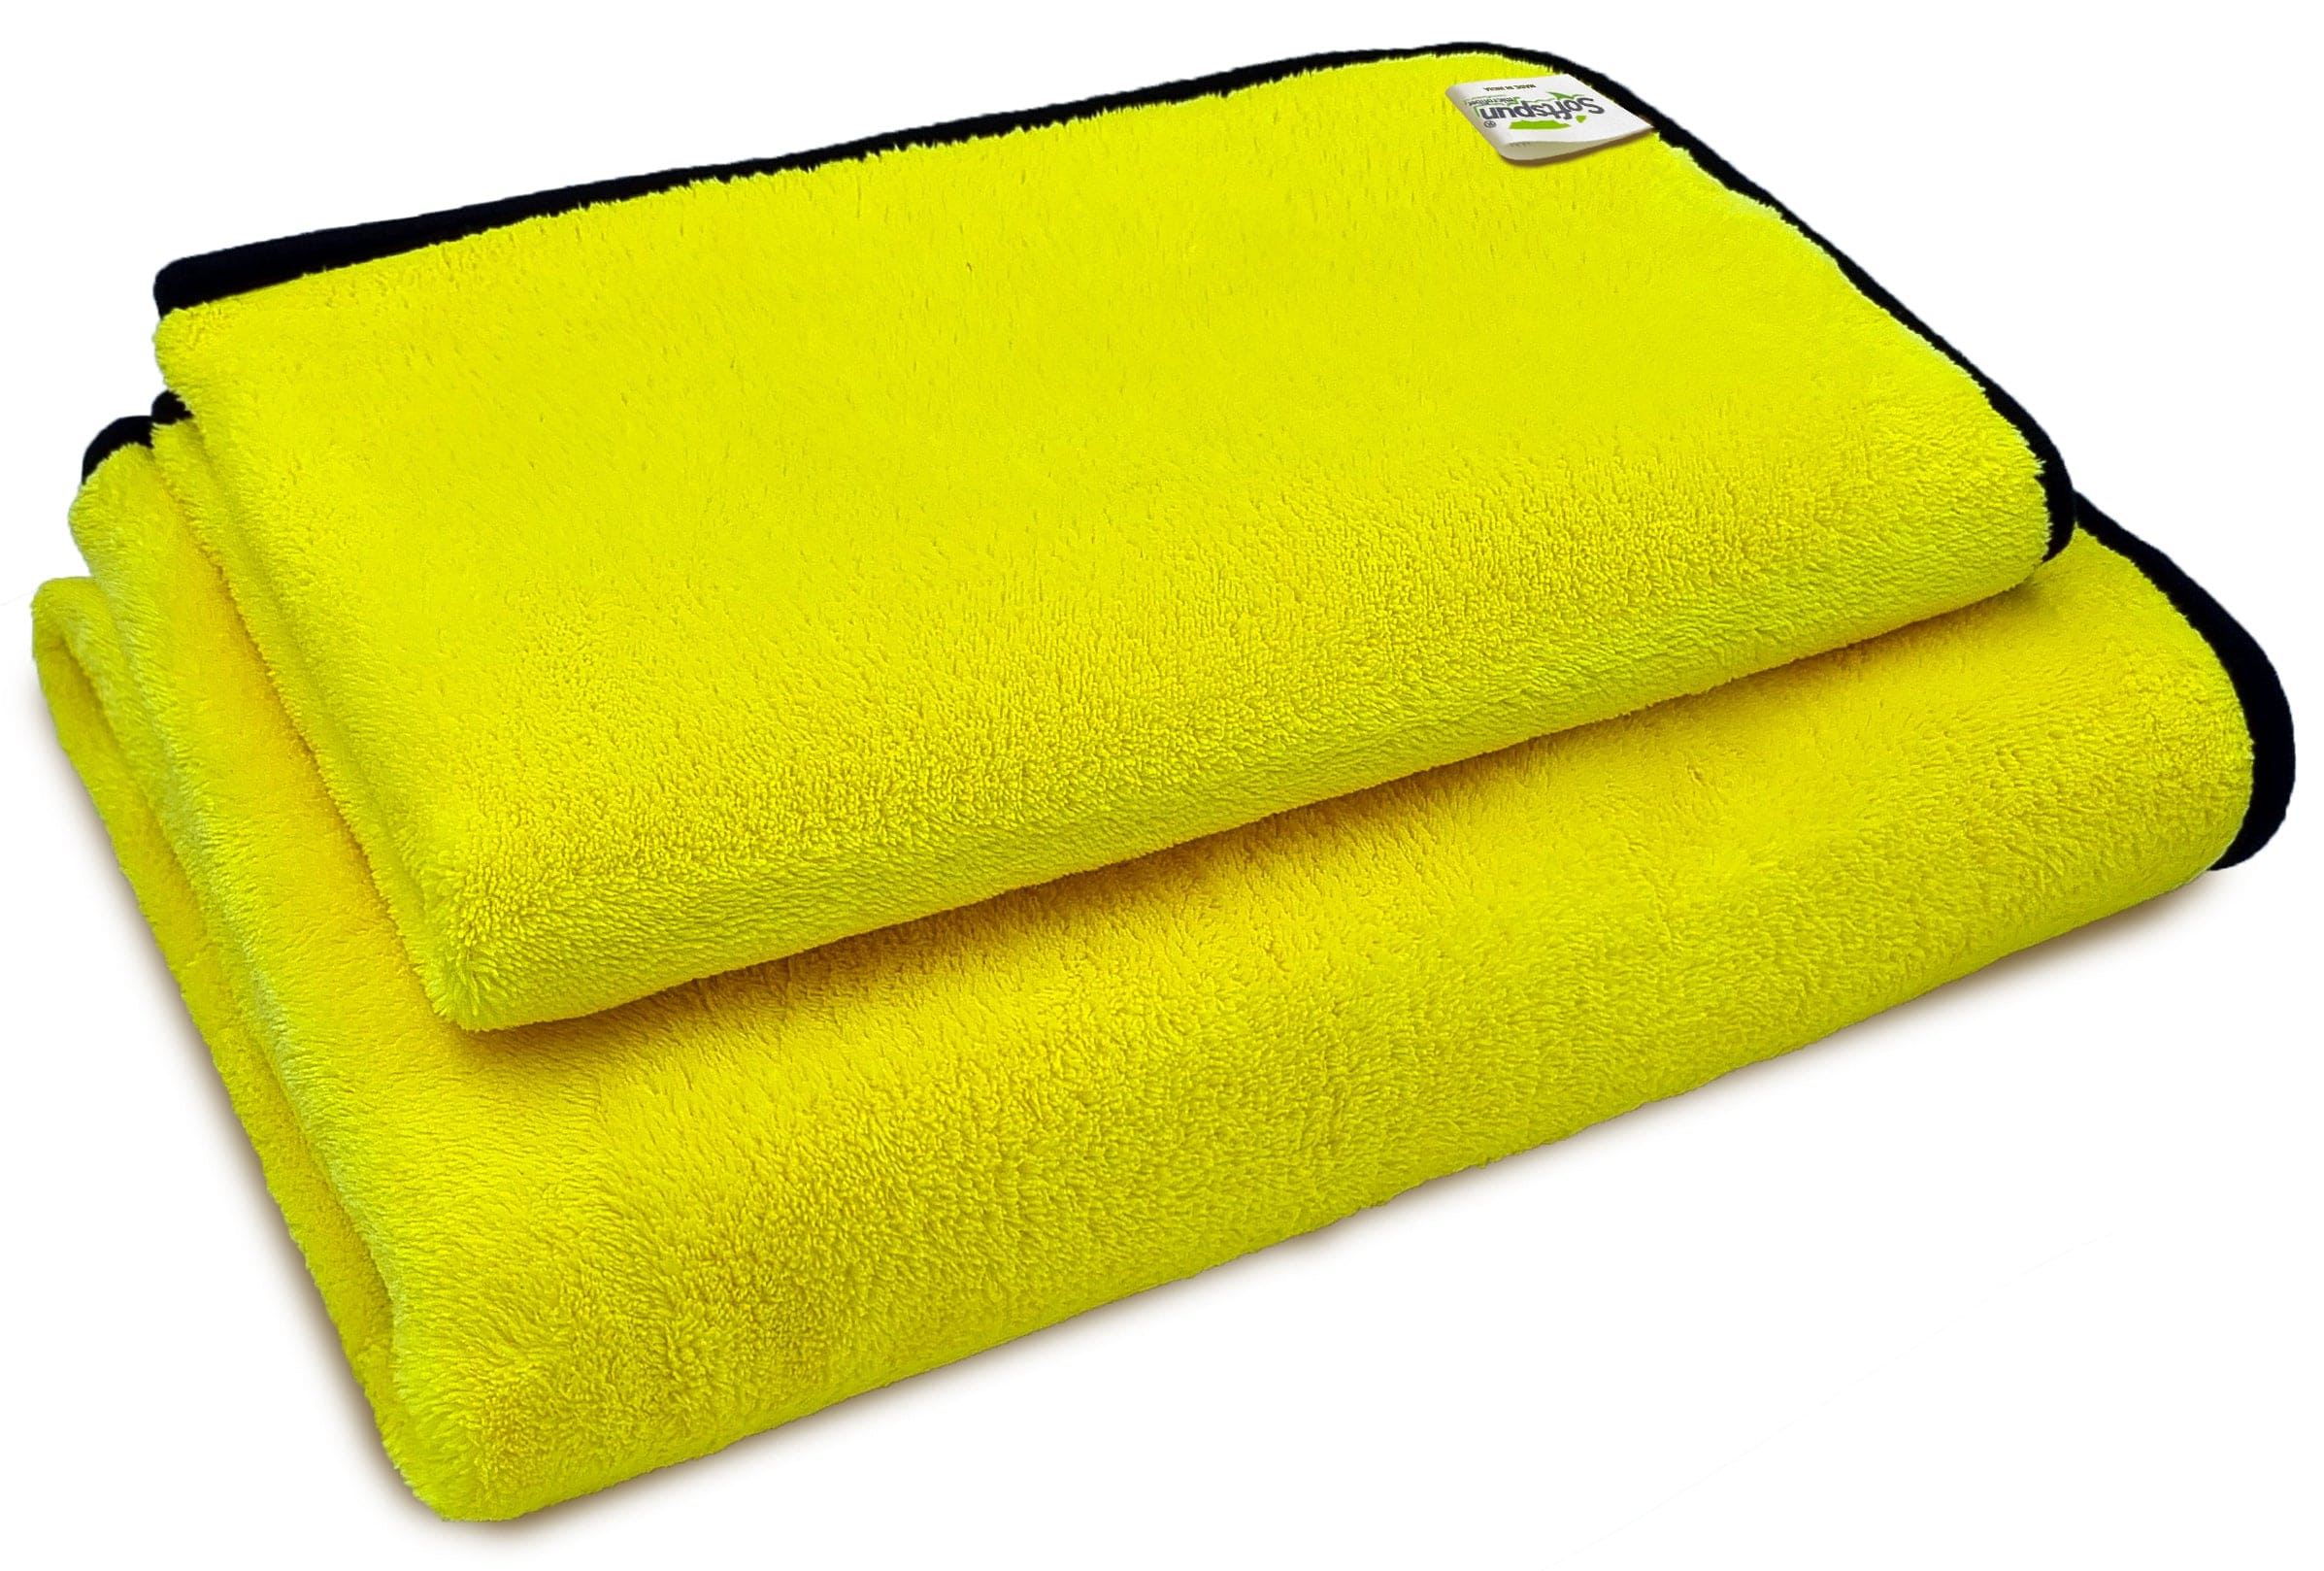 SOFTSPUN Microfiber Bath Towel 2 pc 70X140cm & 40X60cm 280GSM  Ultra Absorbent Super Soft & Comfortable Quick Drying for Men & Women Daily Use Pack of 1 Extra Large Size Unisex.